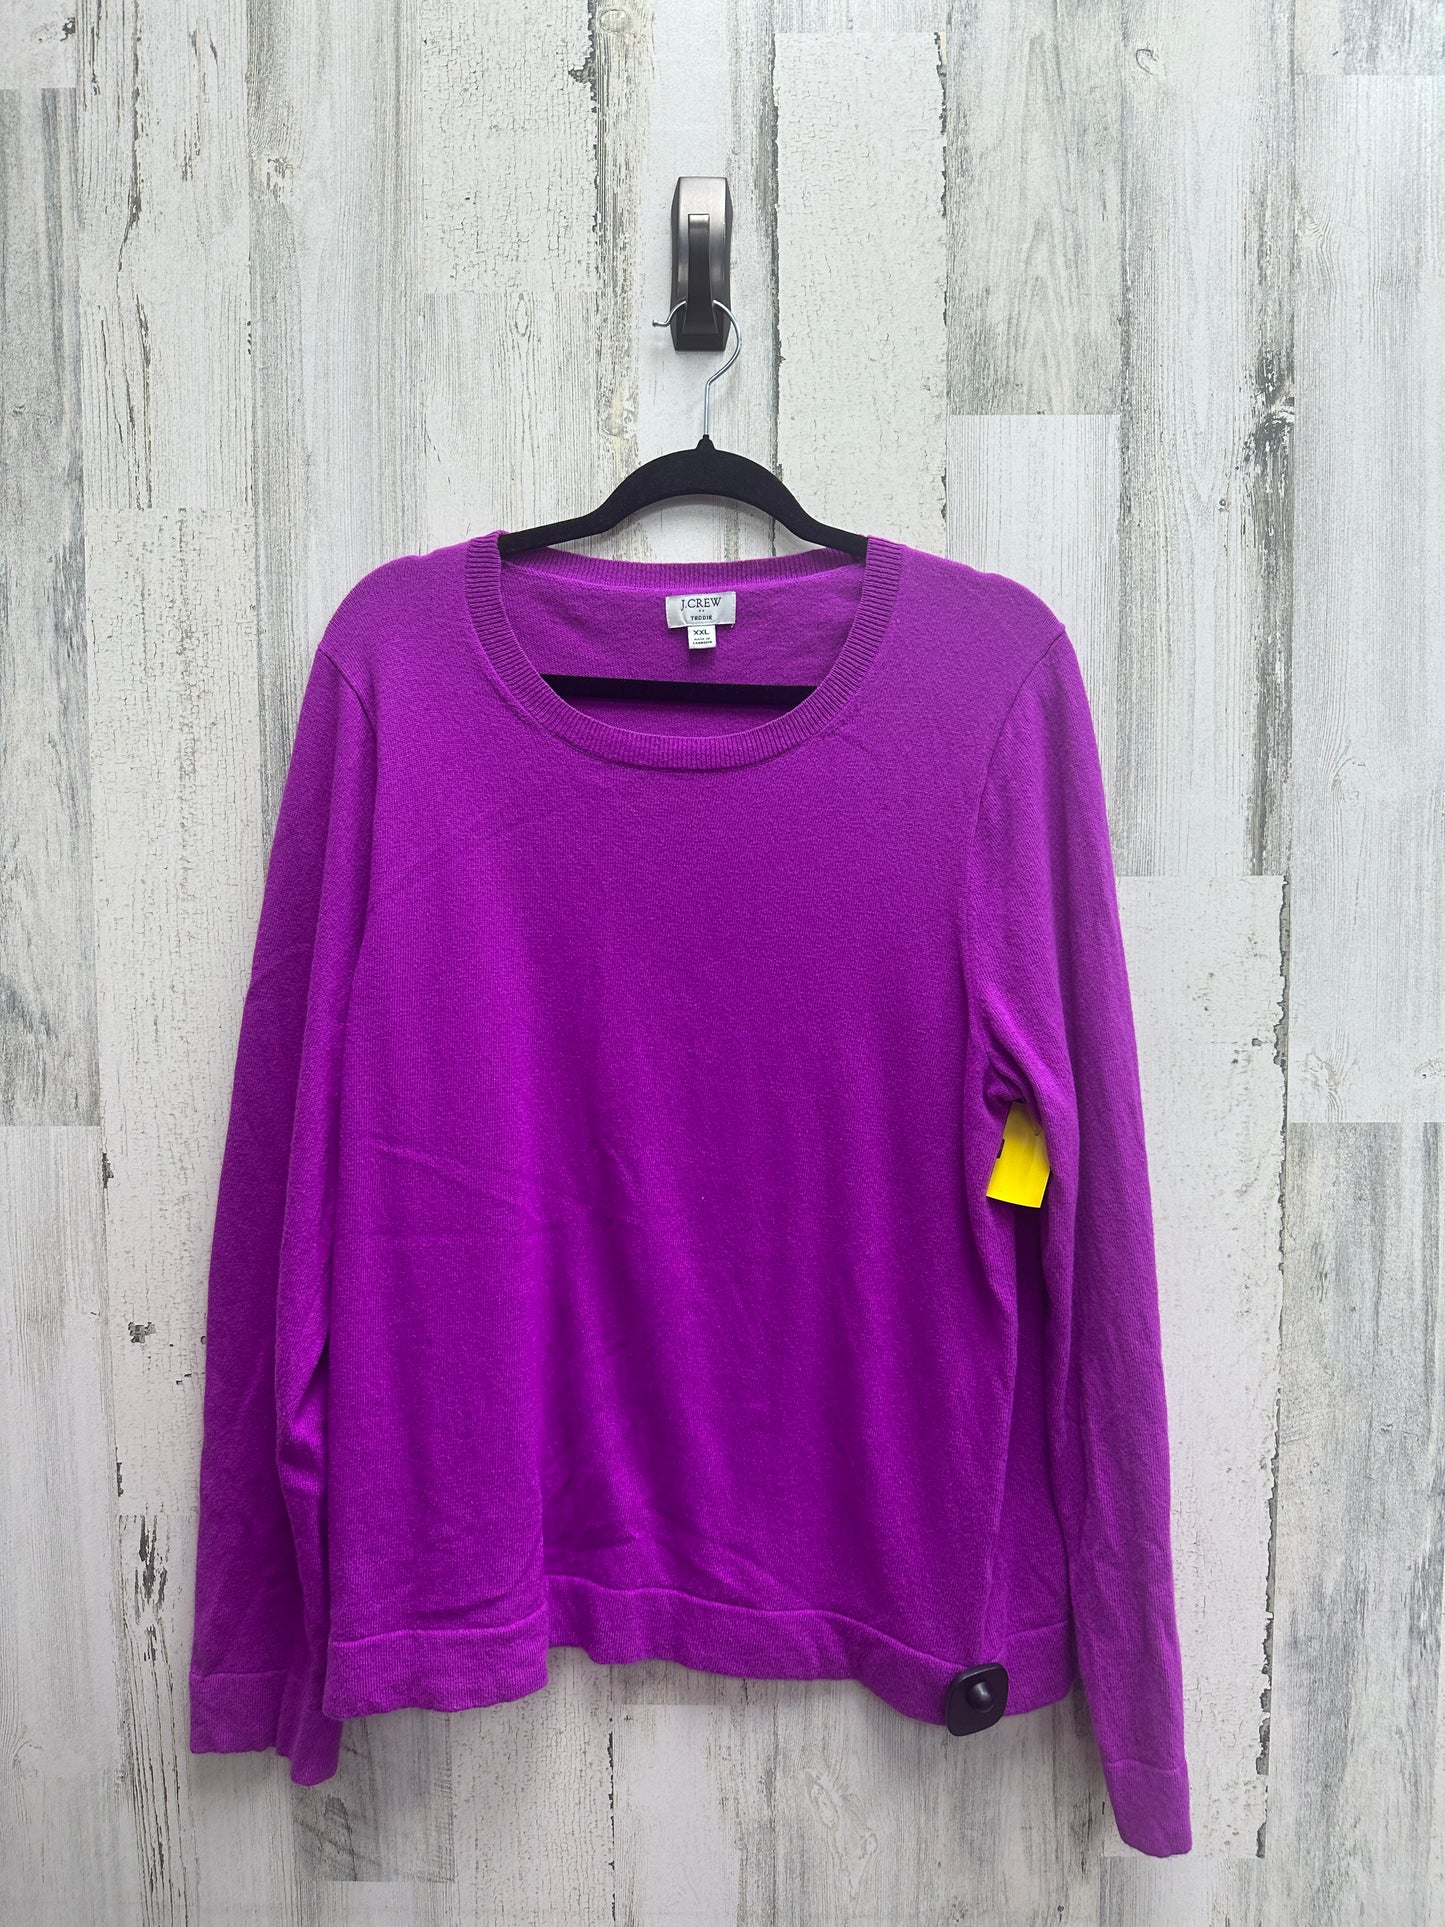 Top Long Sleeve By J Crew  Size: 2x